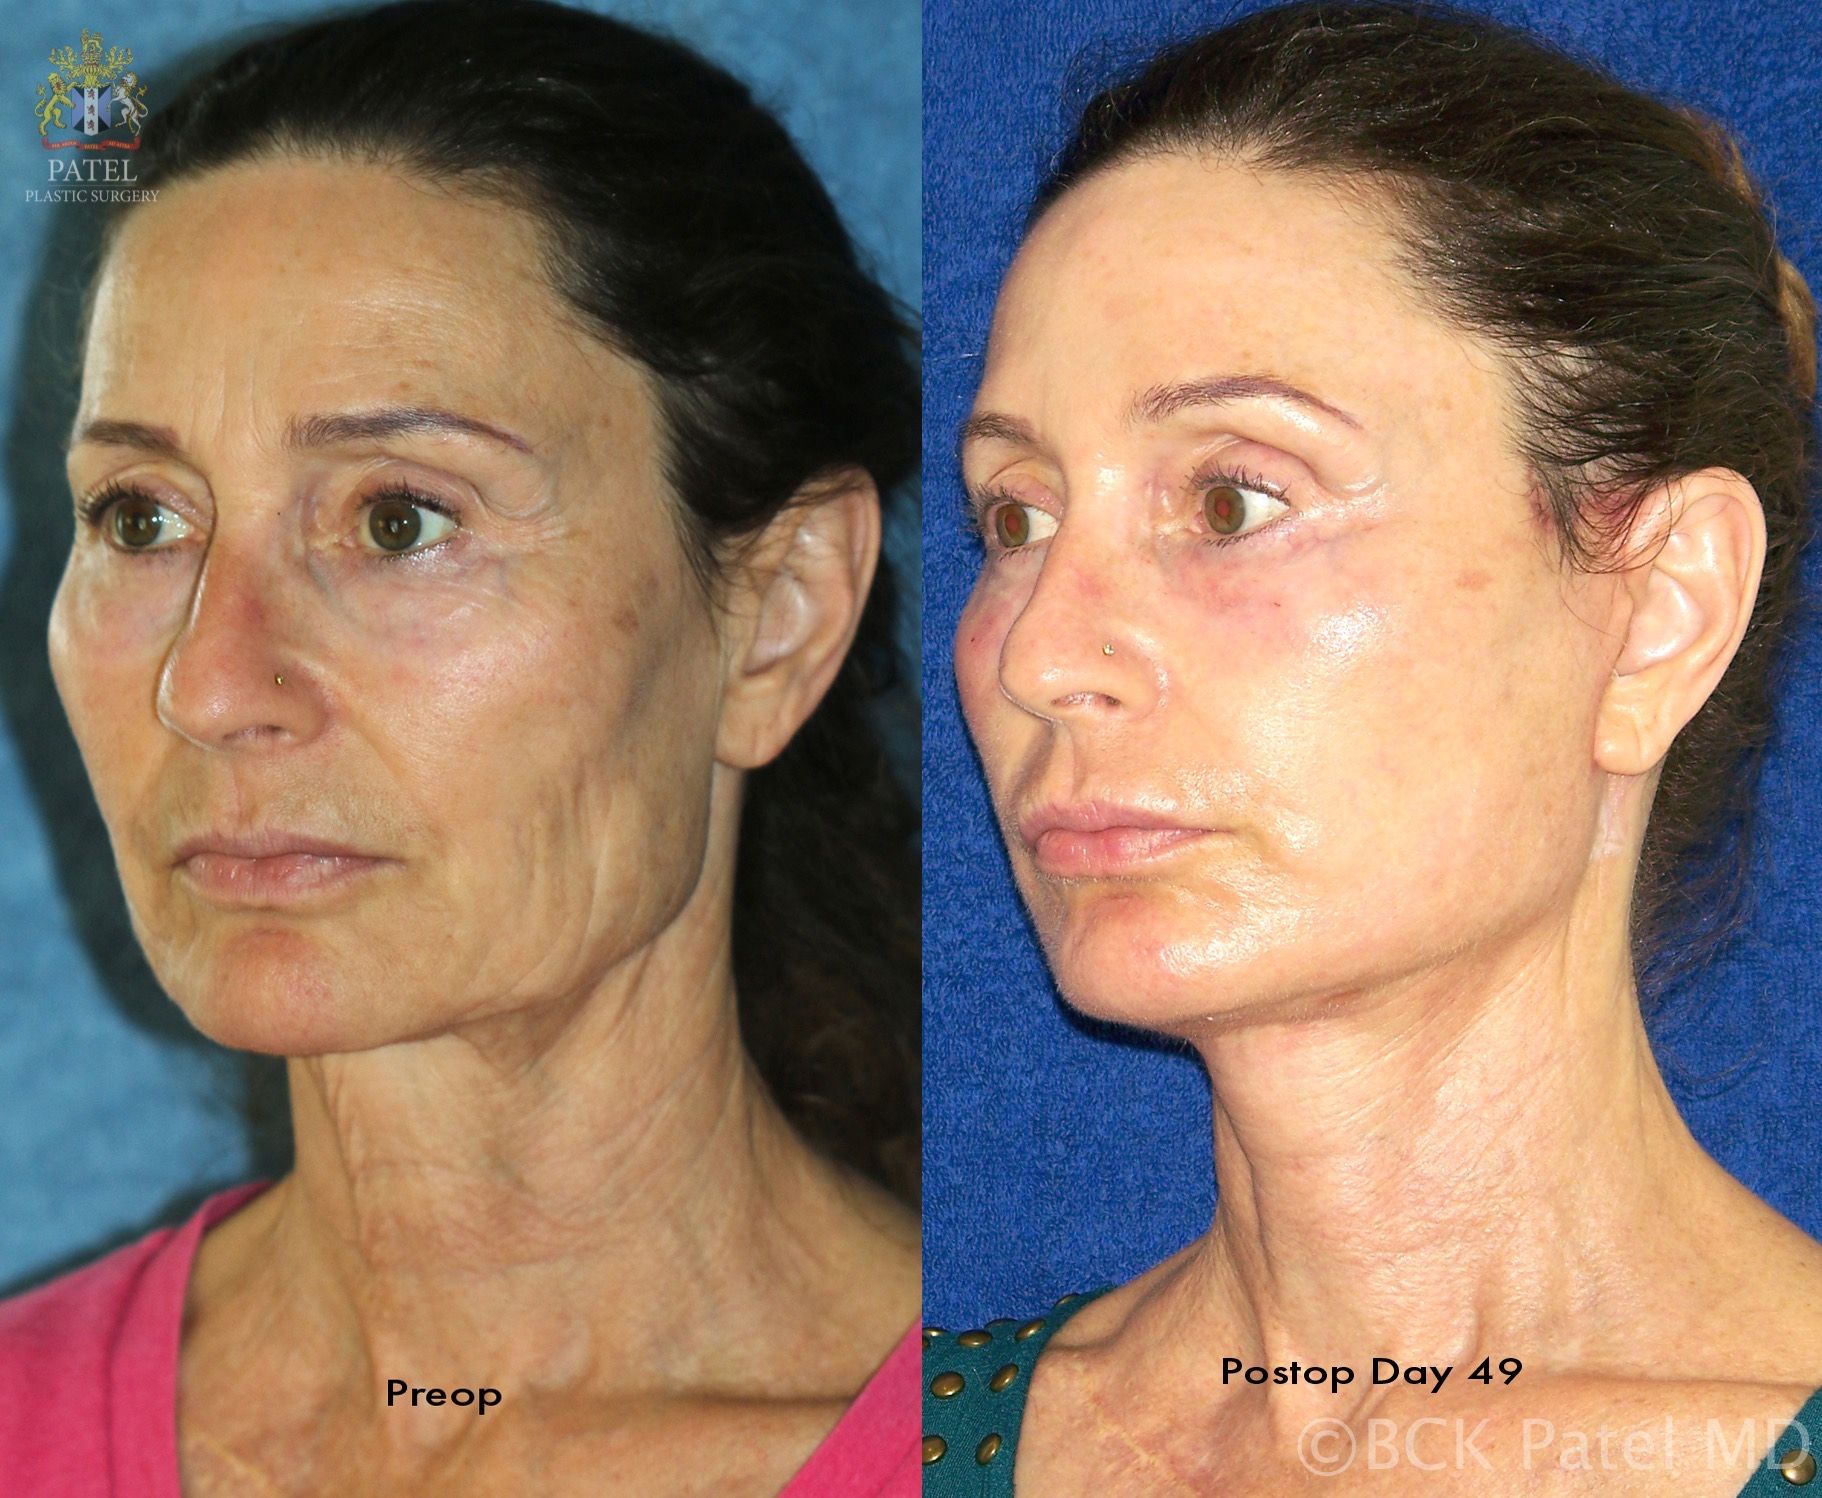 Facelift and necklift giving a beautiful result; Surgery by Dr. BCK Patel MD, FRCS, Salt Lake City, Patel Plastic Surgery Results at 49 days after a lower face and necklift and the use of the fractionated CO2 laser